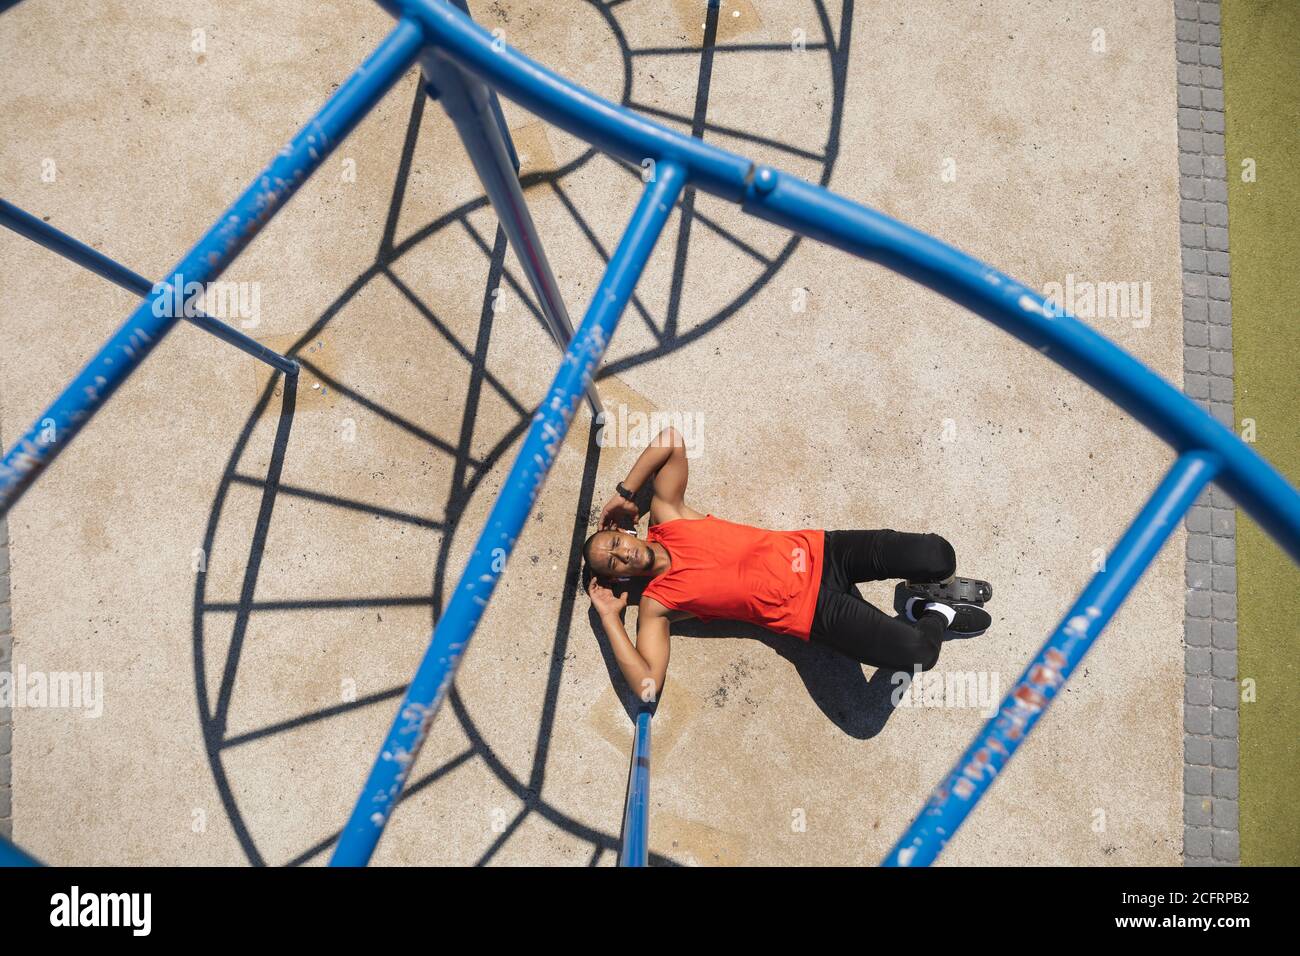 Man with prosthetic leg performing crunches exercise in the park Stock Photo